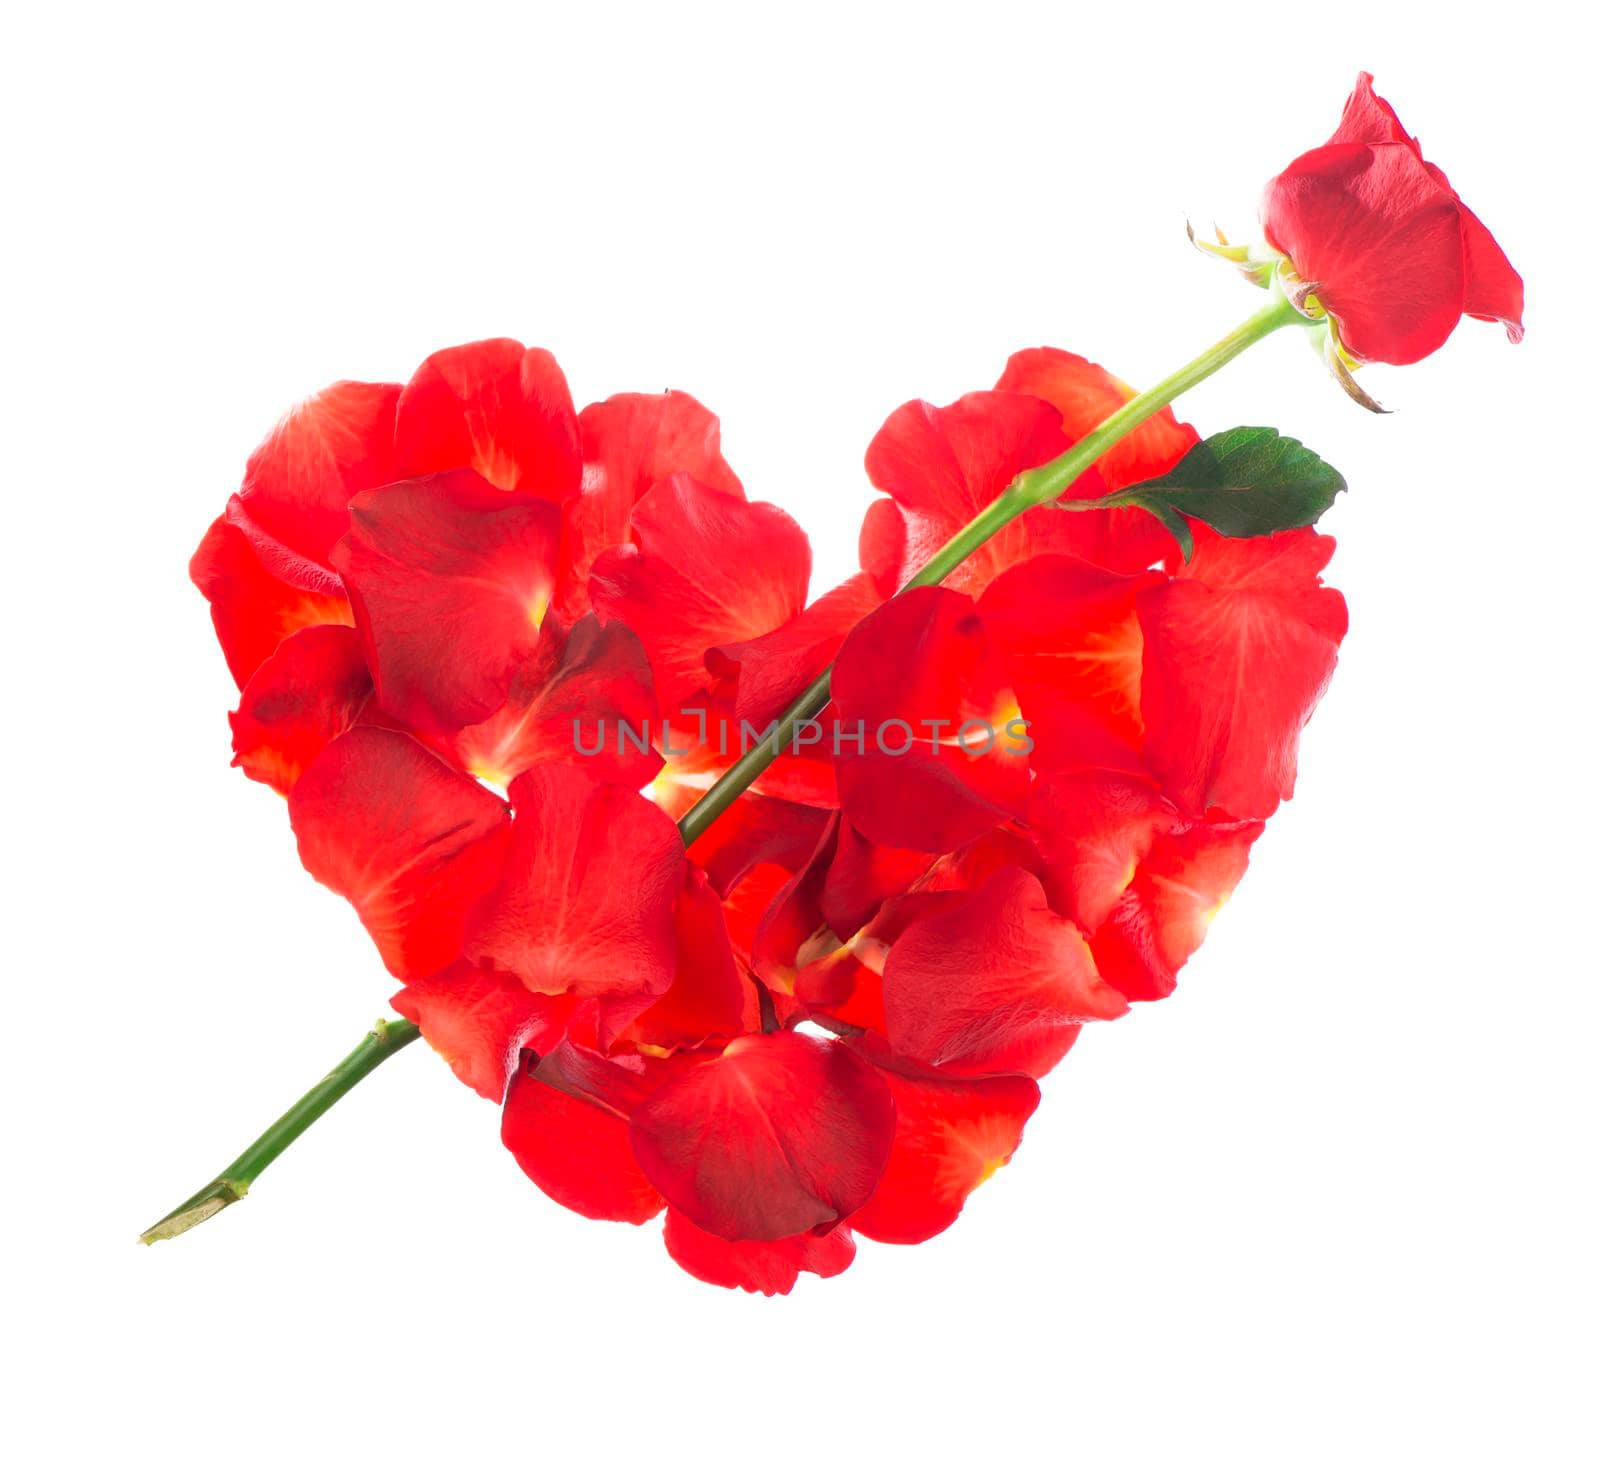 Heart Made of Red Roses Isolated by aprilphoto